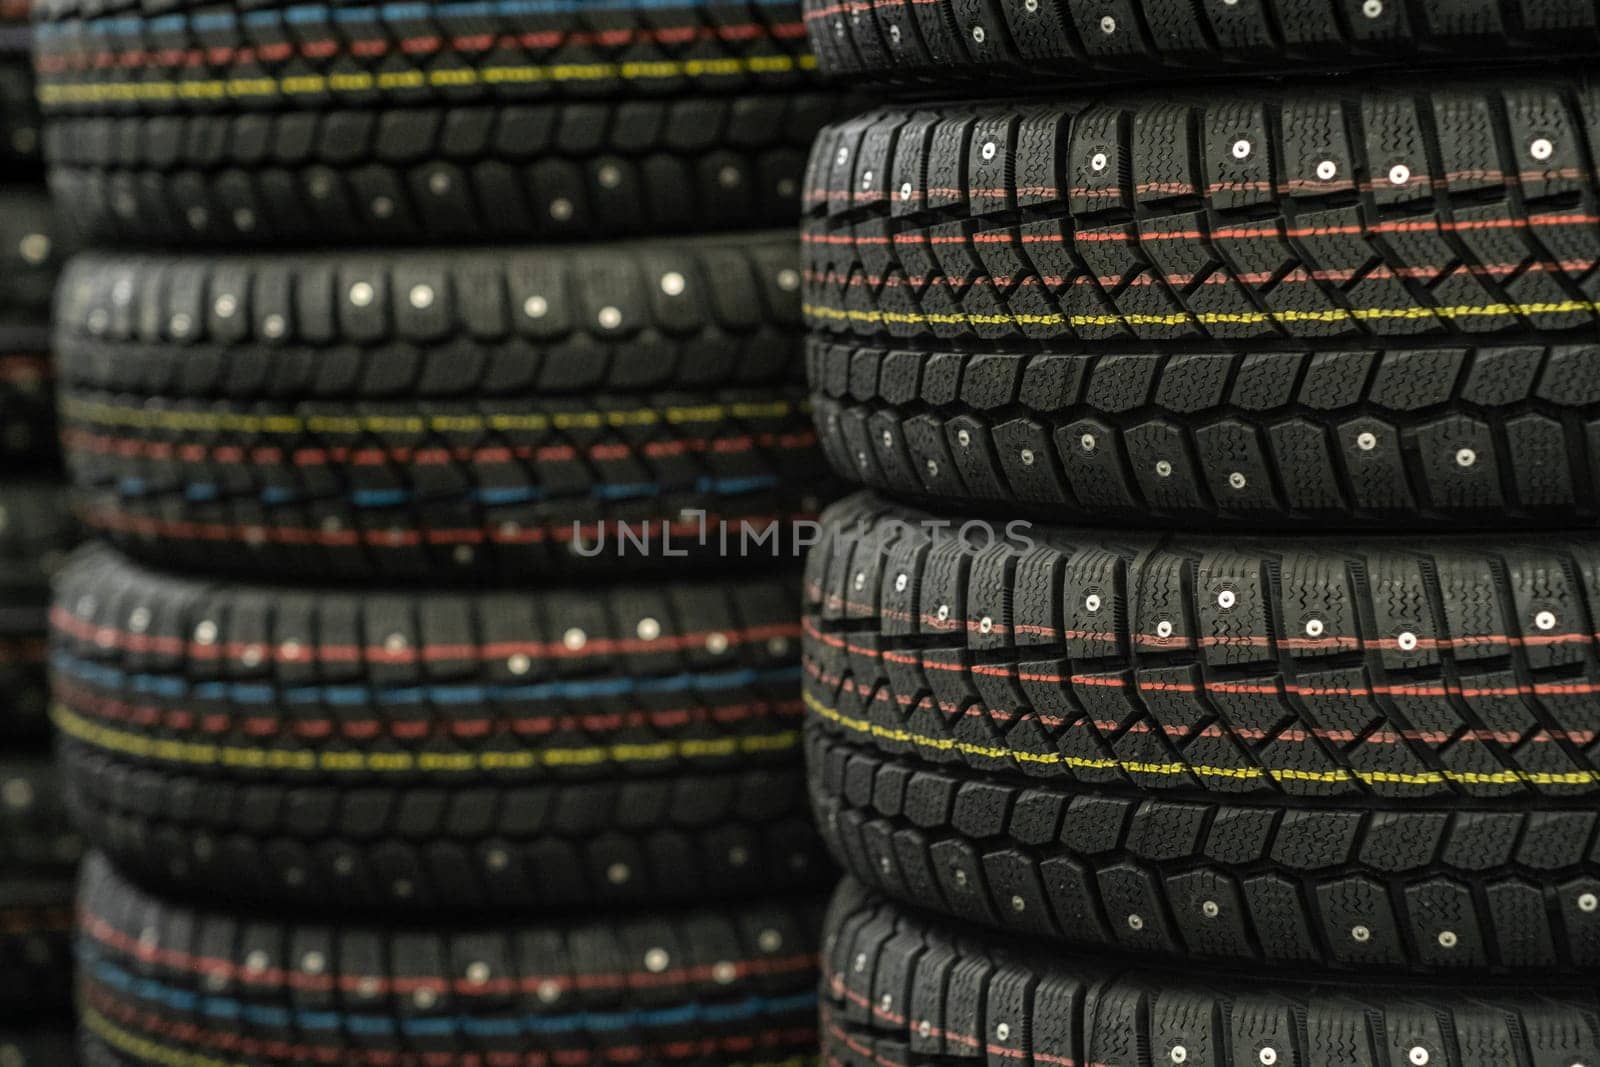 Sale of car tires for sale in the store. Many new winter tires lie by AnatoliiFoto